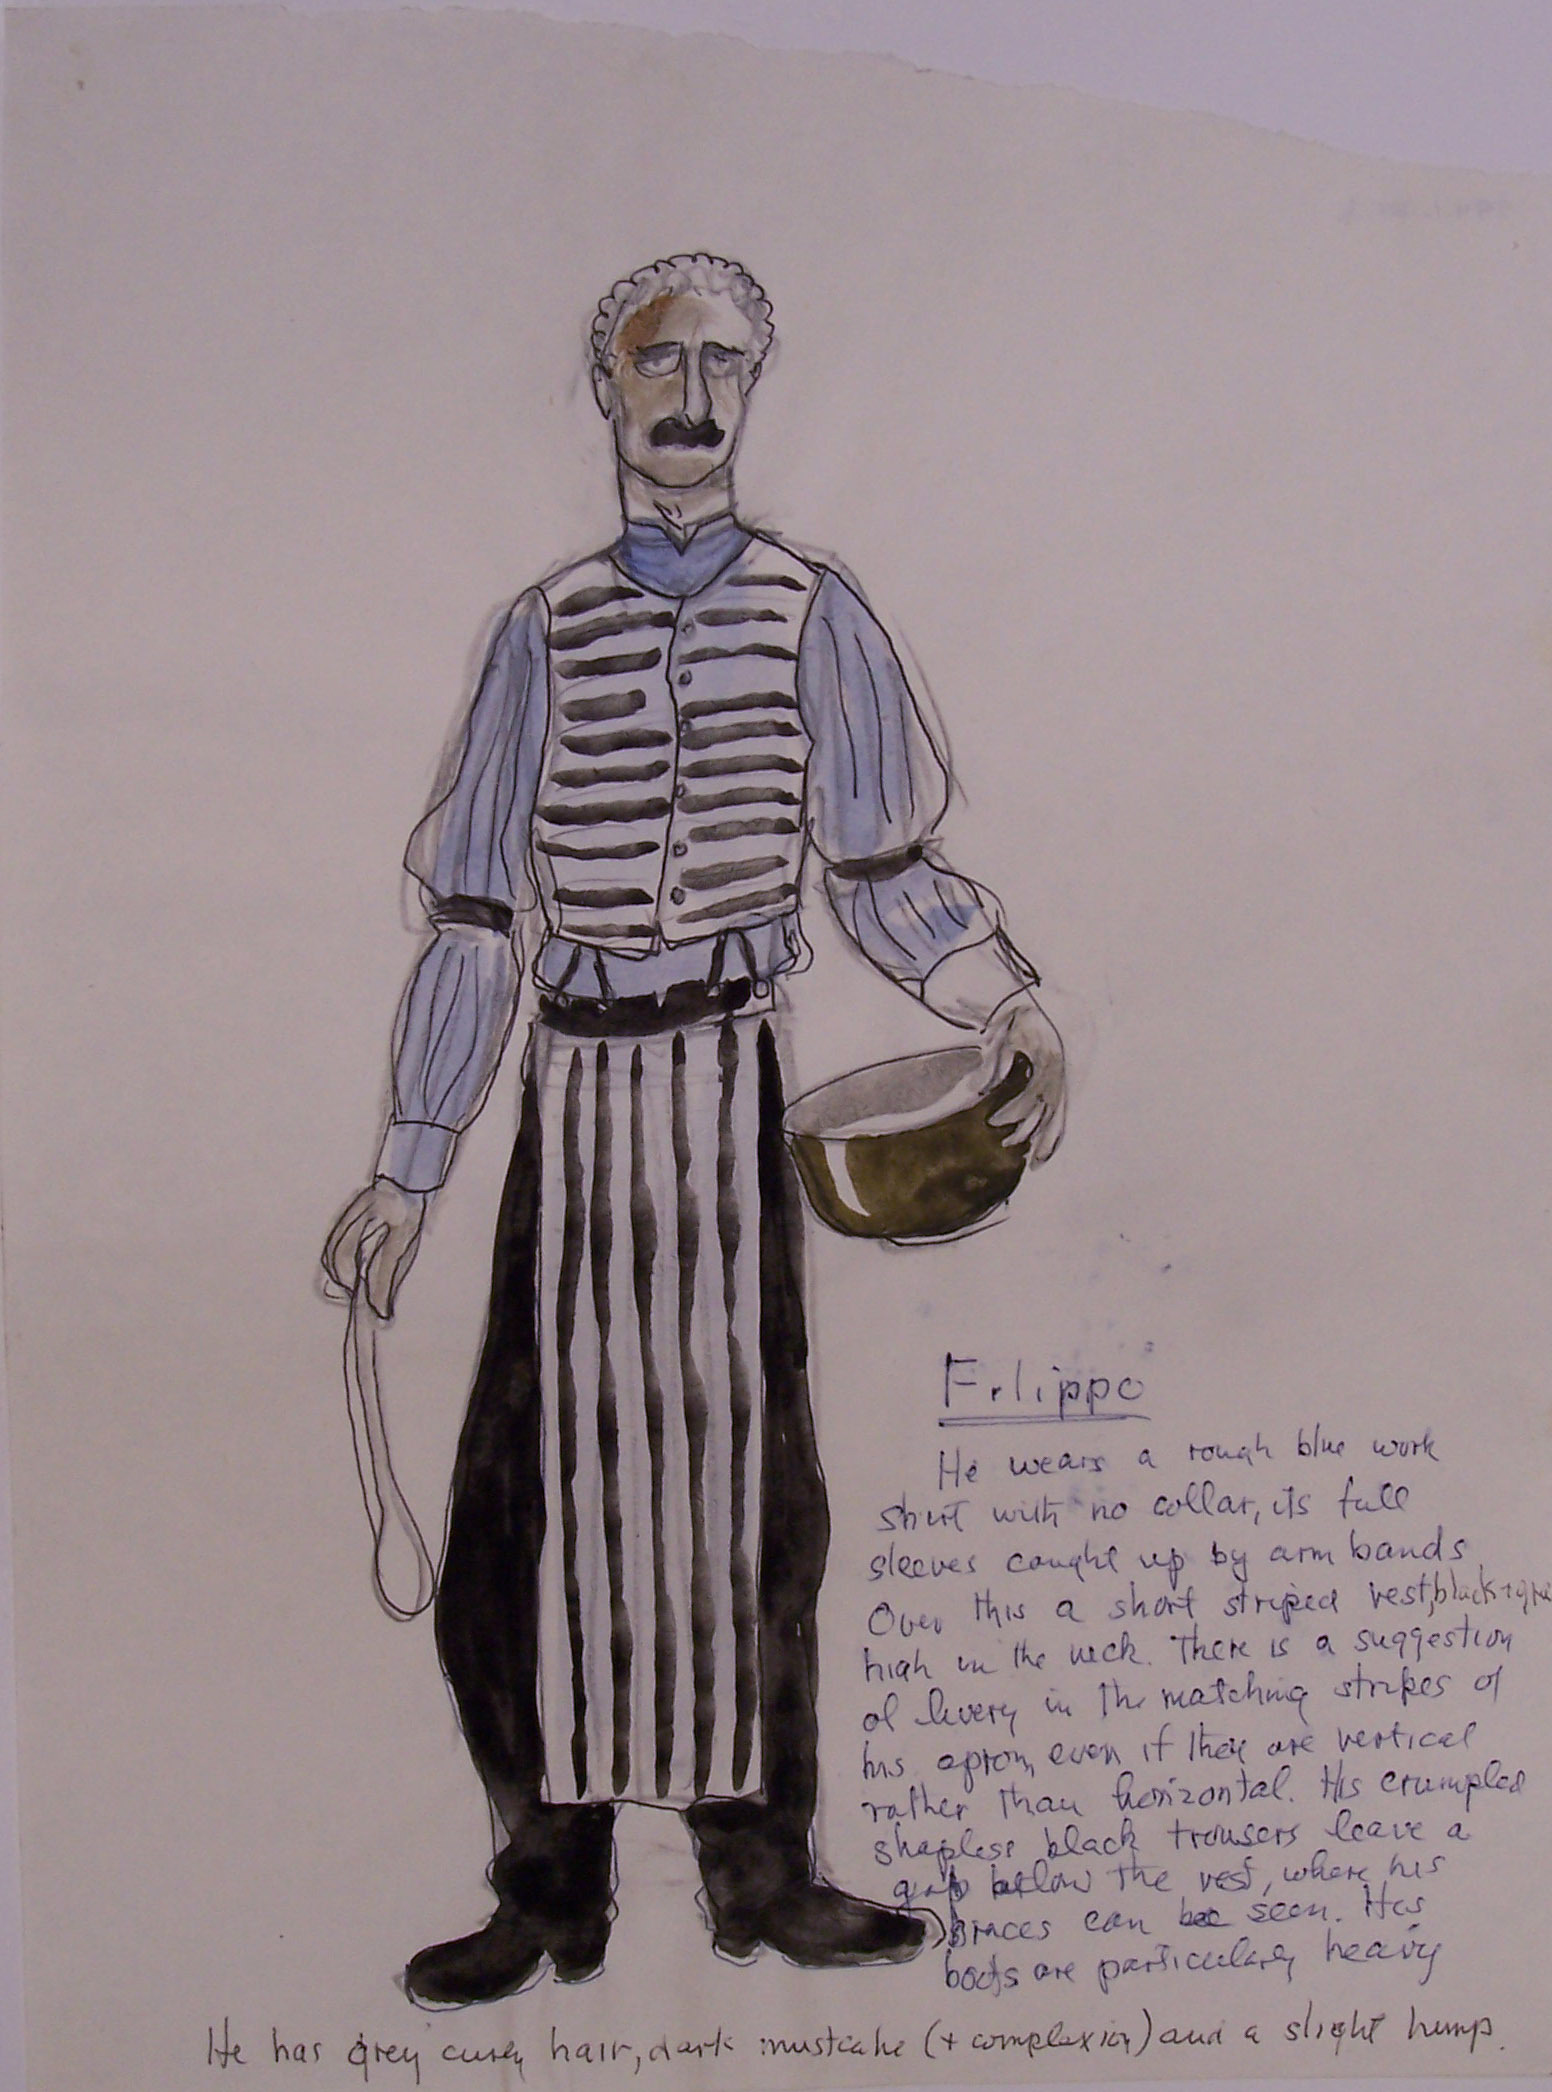 Whittaker costume design for Rules of the Game